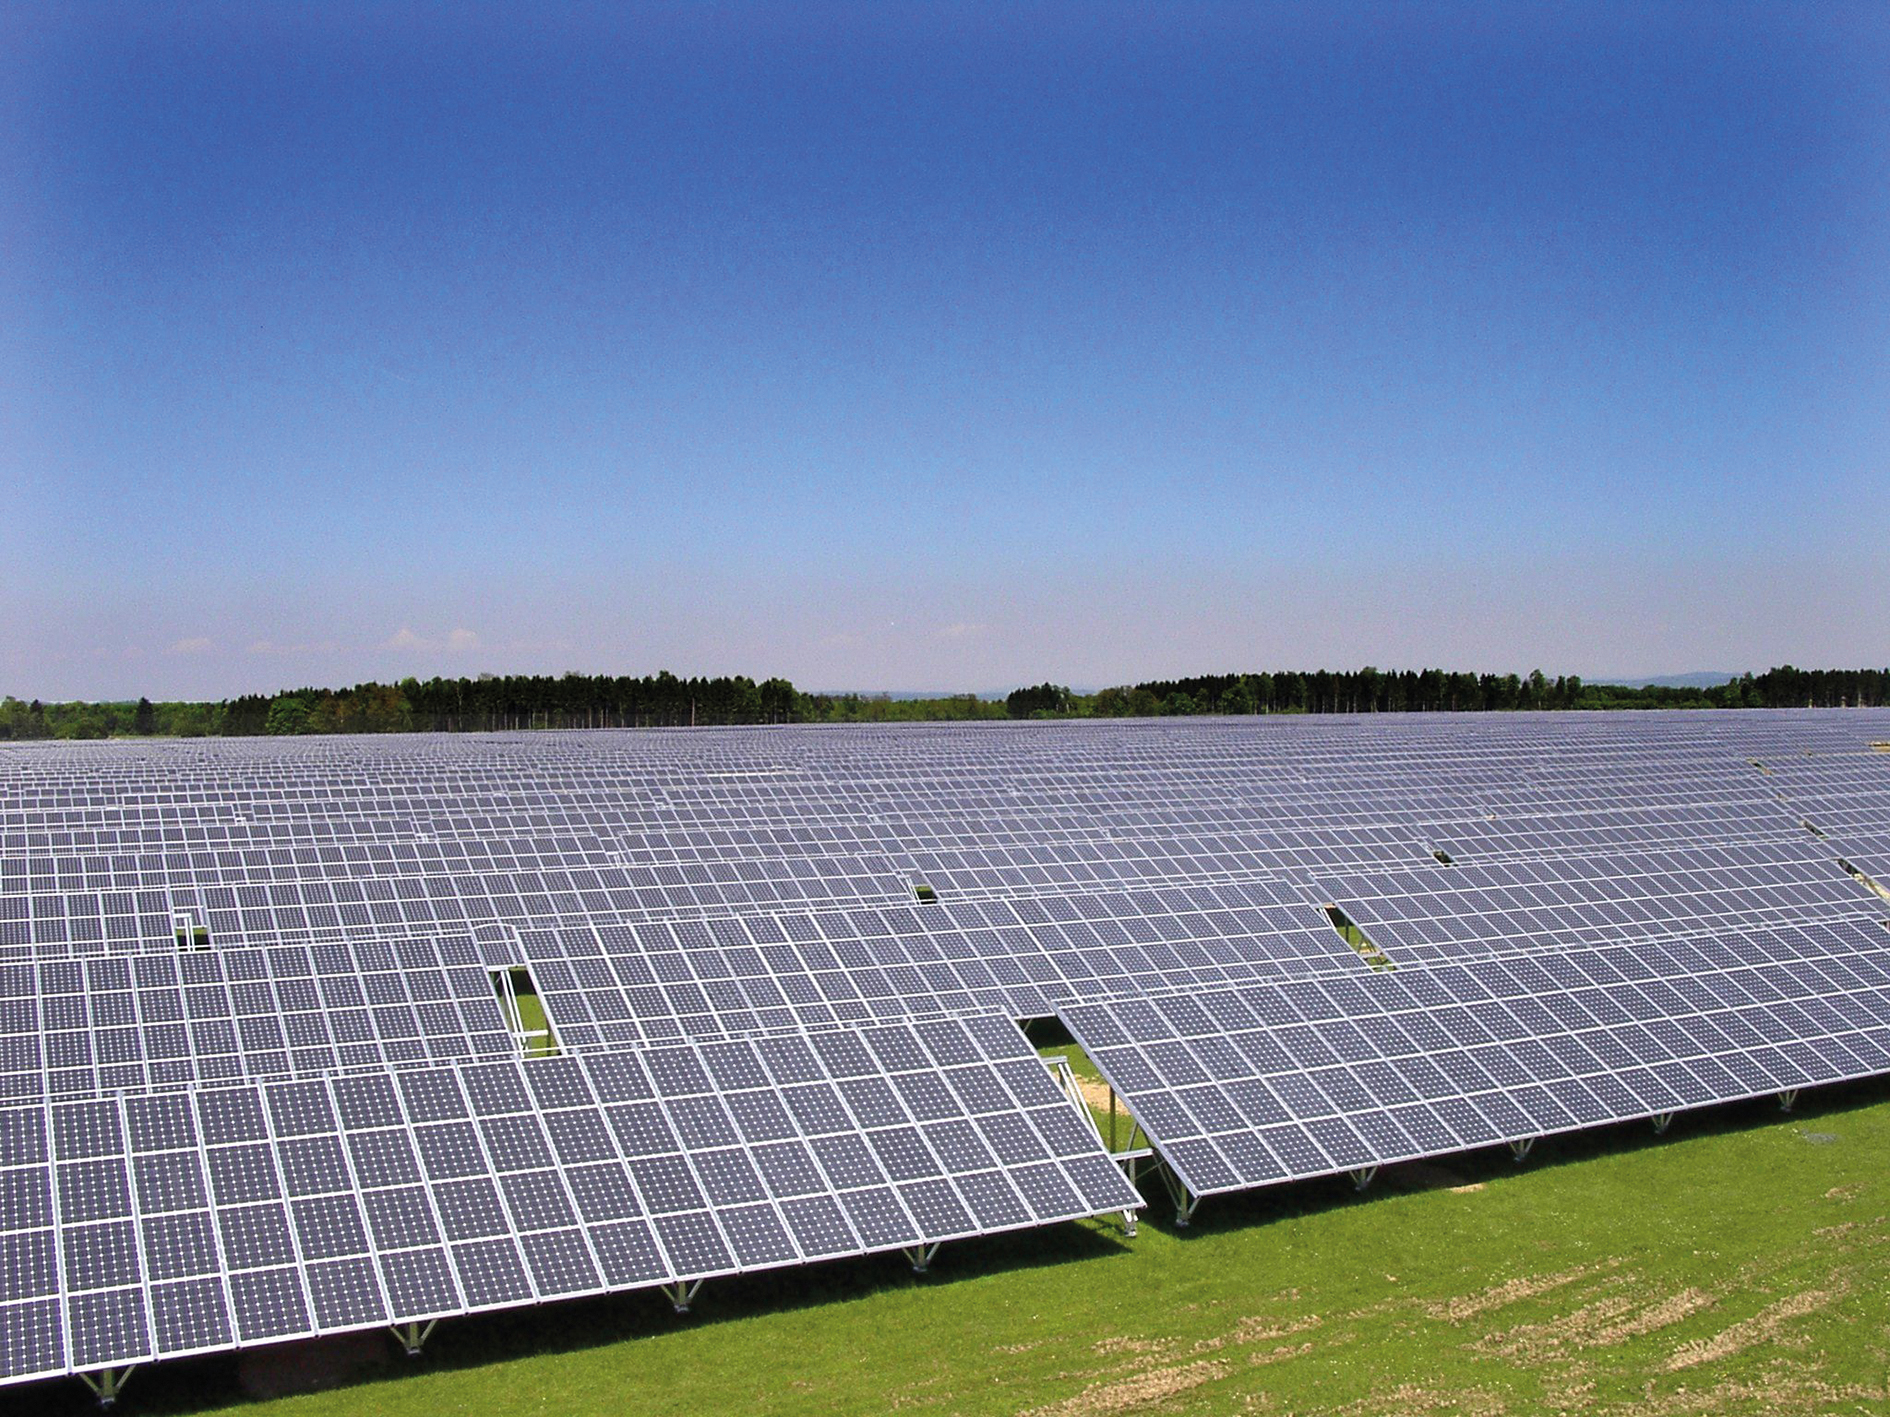 Photovoltaics is the main pillar of the energy transition